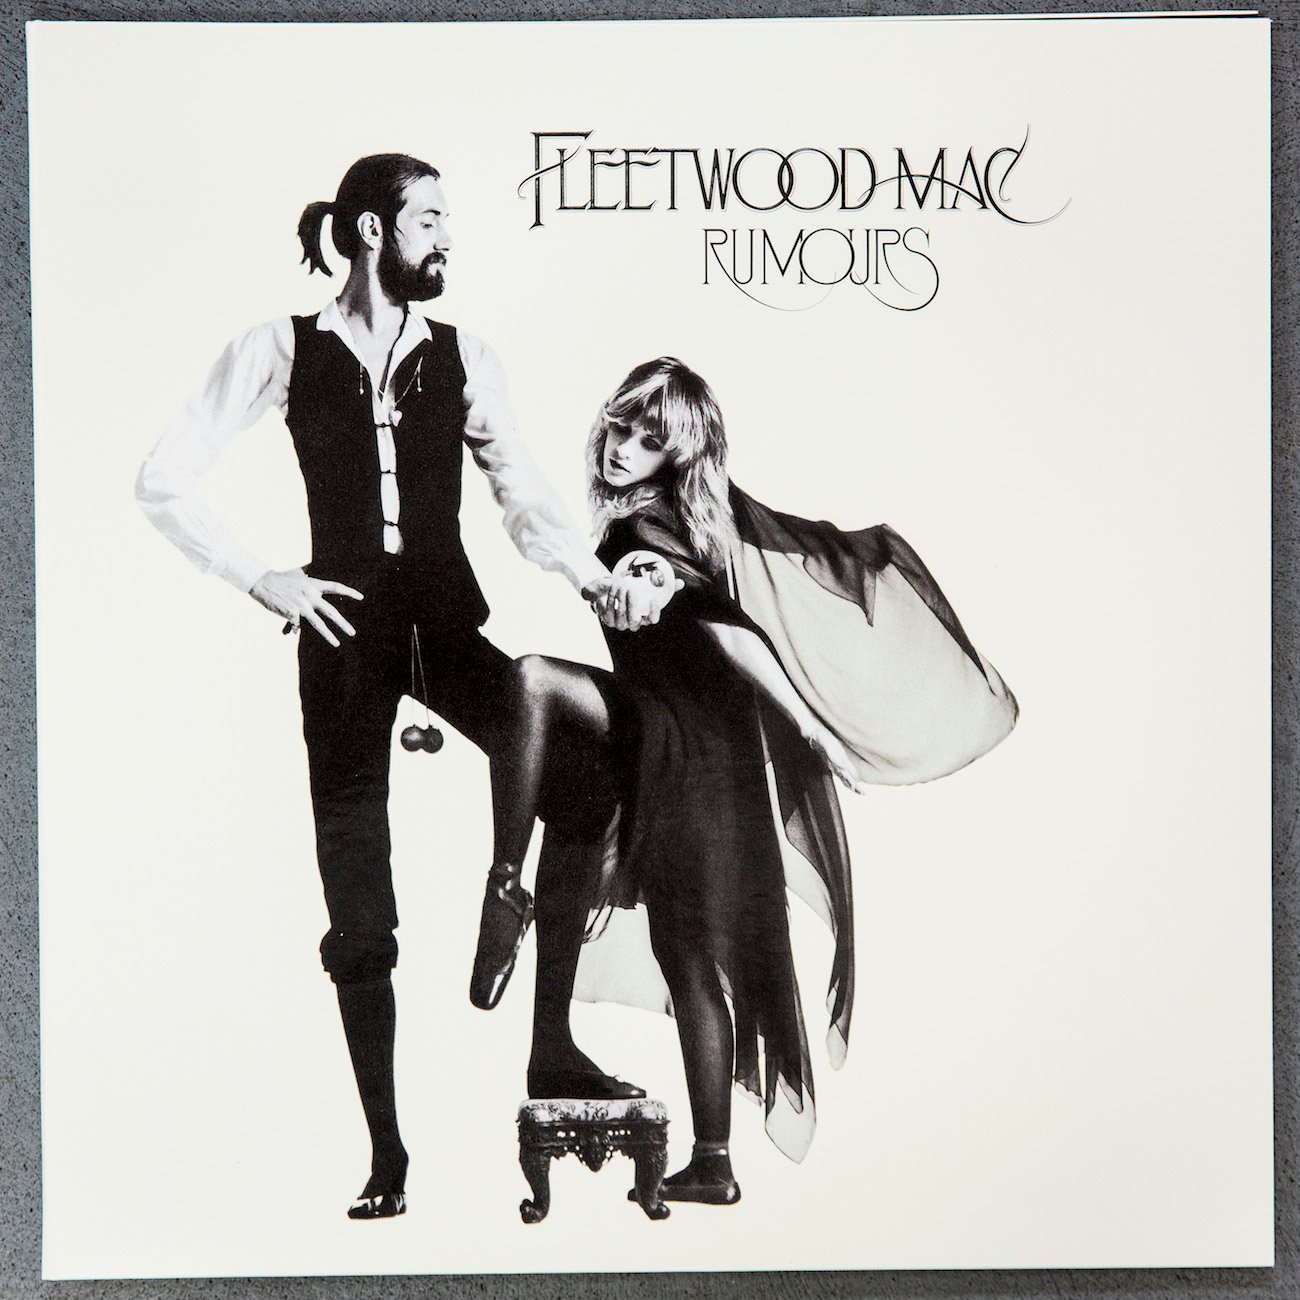 Mick Fleetwood and Stevie Nicks on the cover of Fleetwood Mac's 1977 album, 'Rumours.'